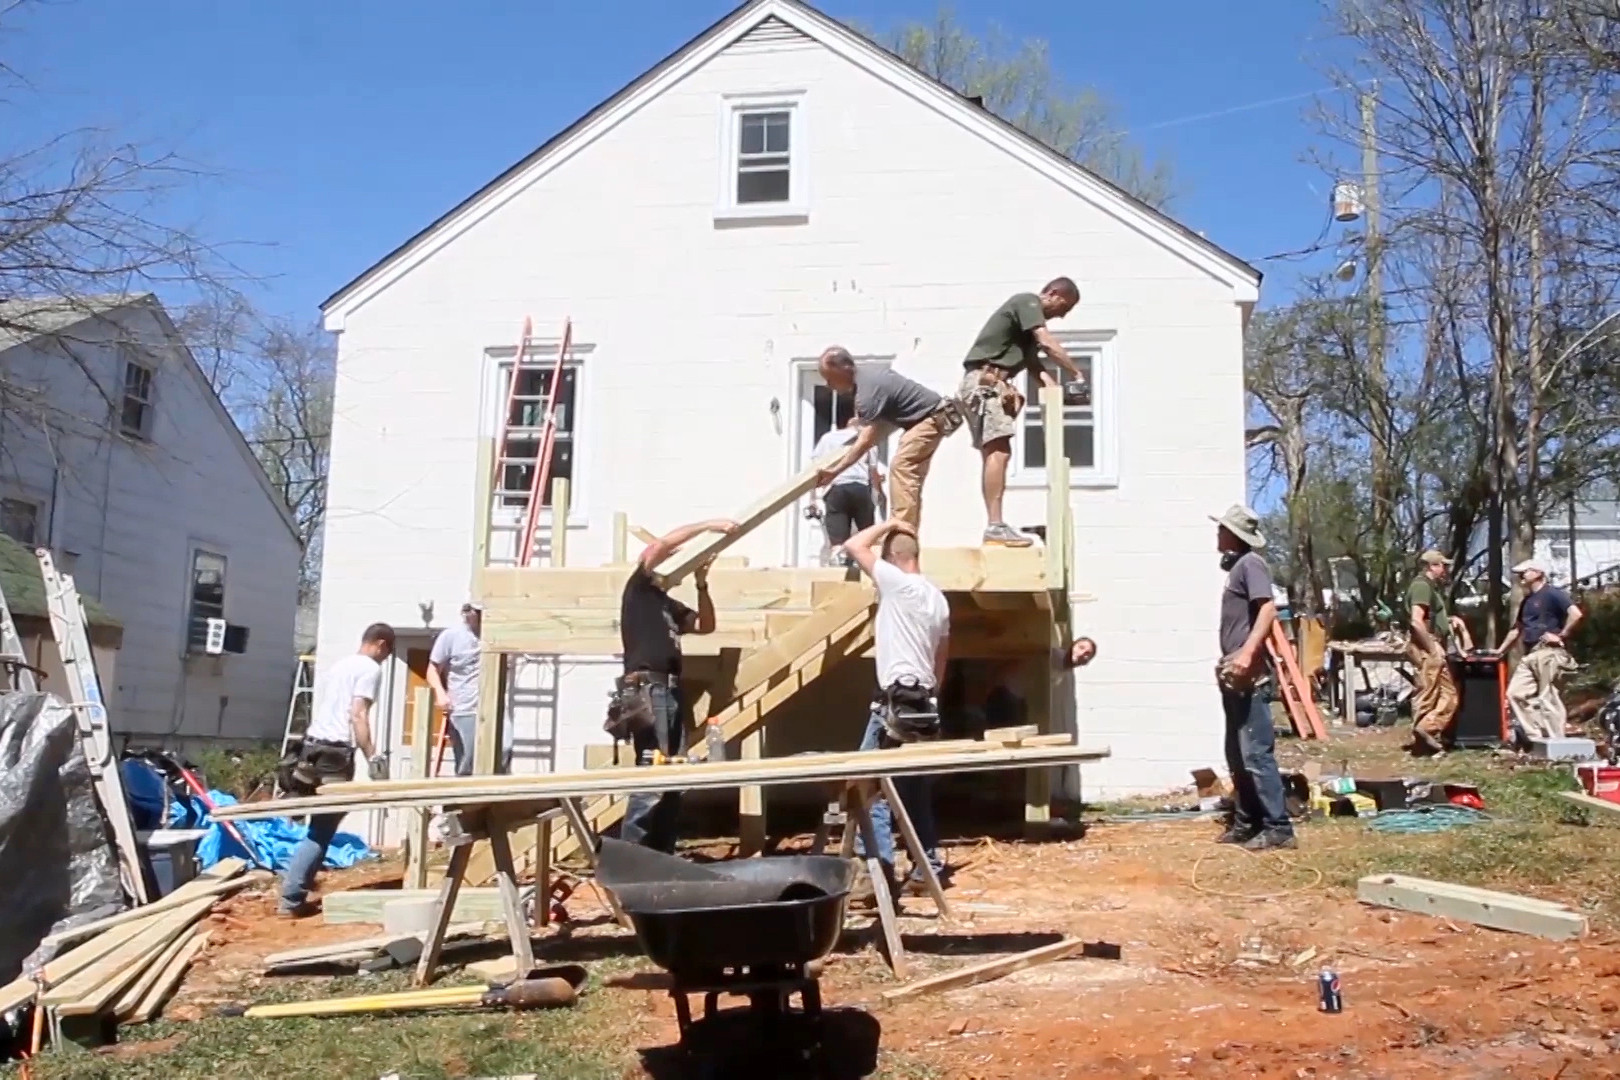 UVA employees working on building a deck